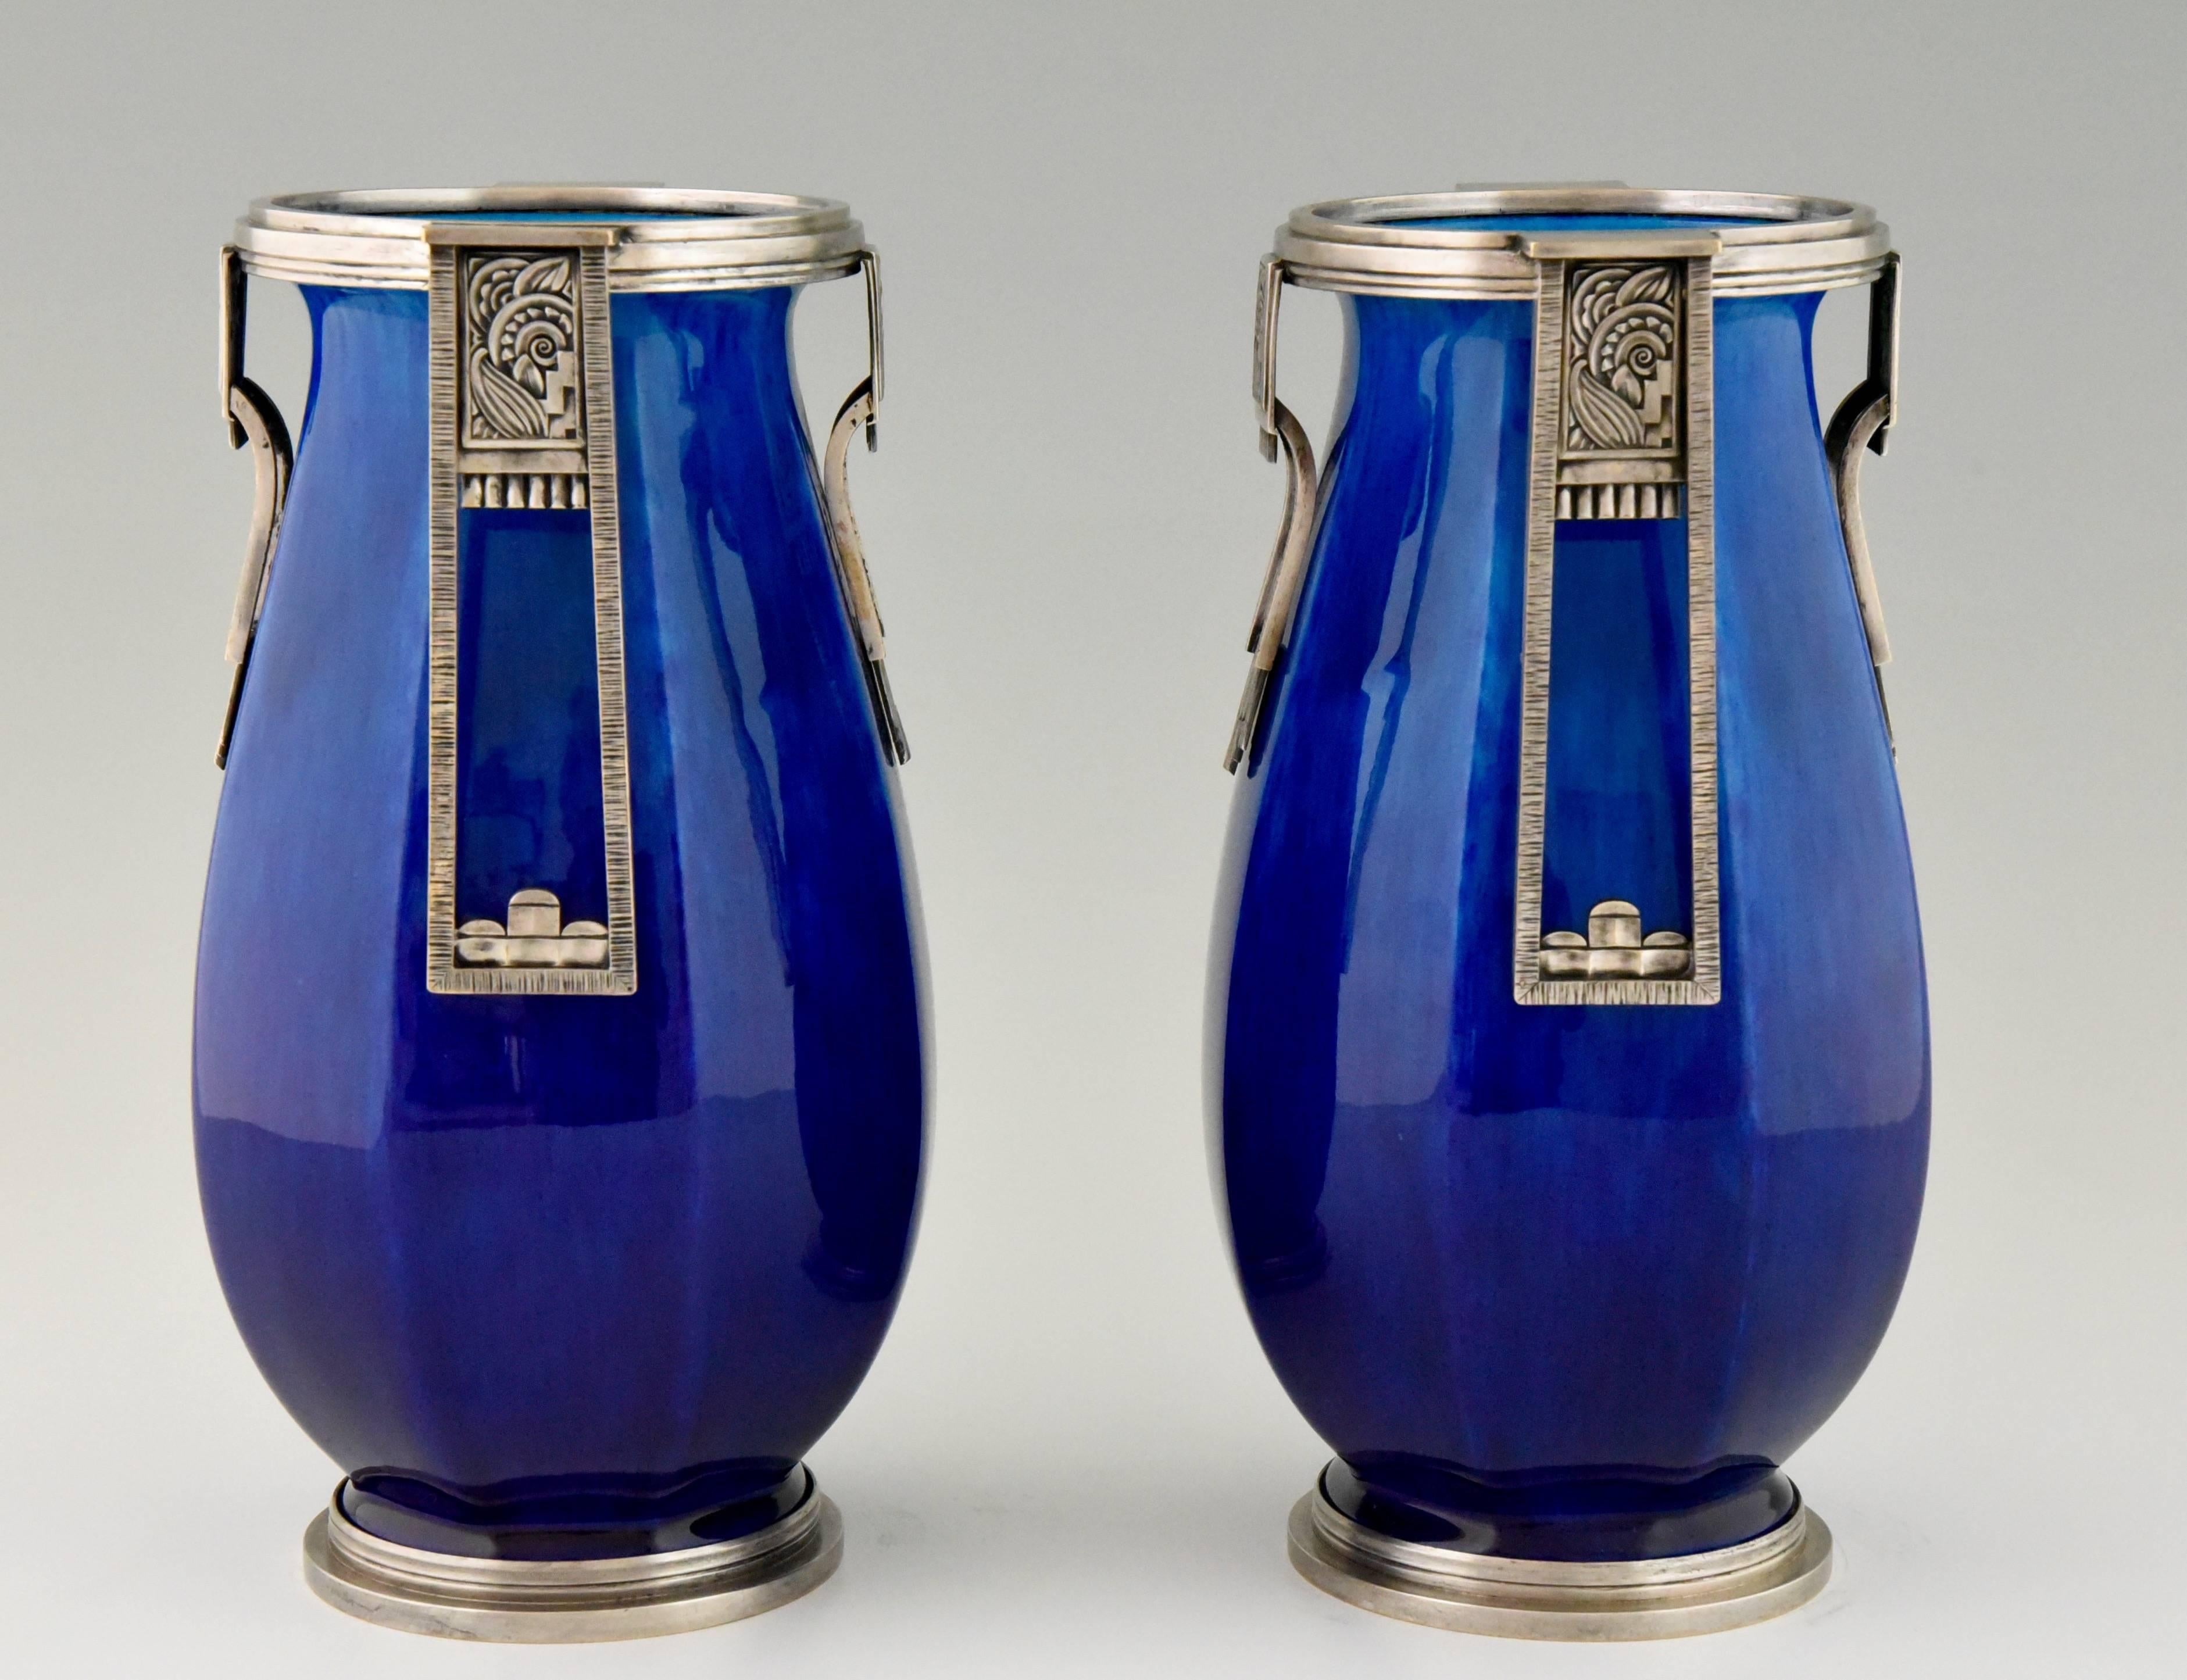 Early 20th Century French Art Deco Ceramic and Silvered Bronze Vases by Paul Milet for Sevres, 1925